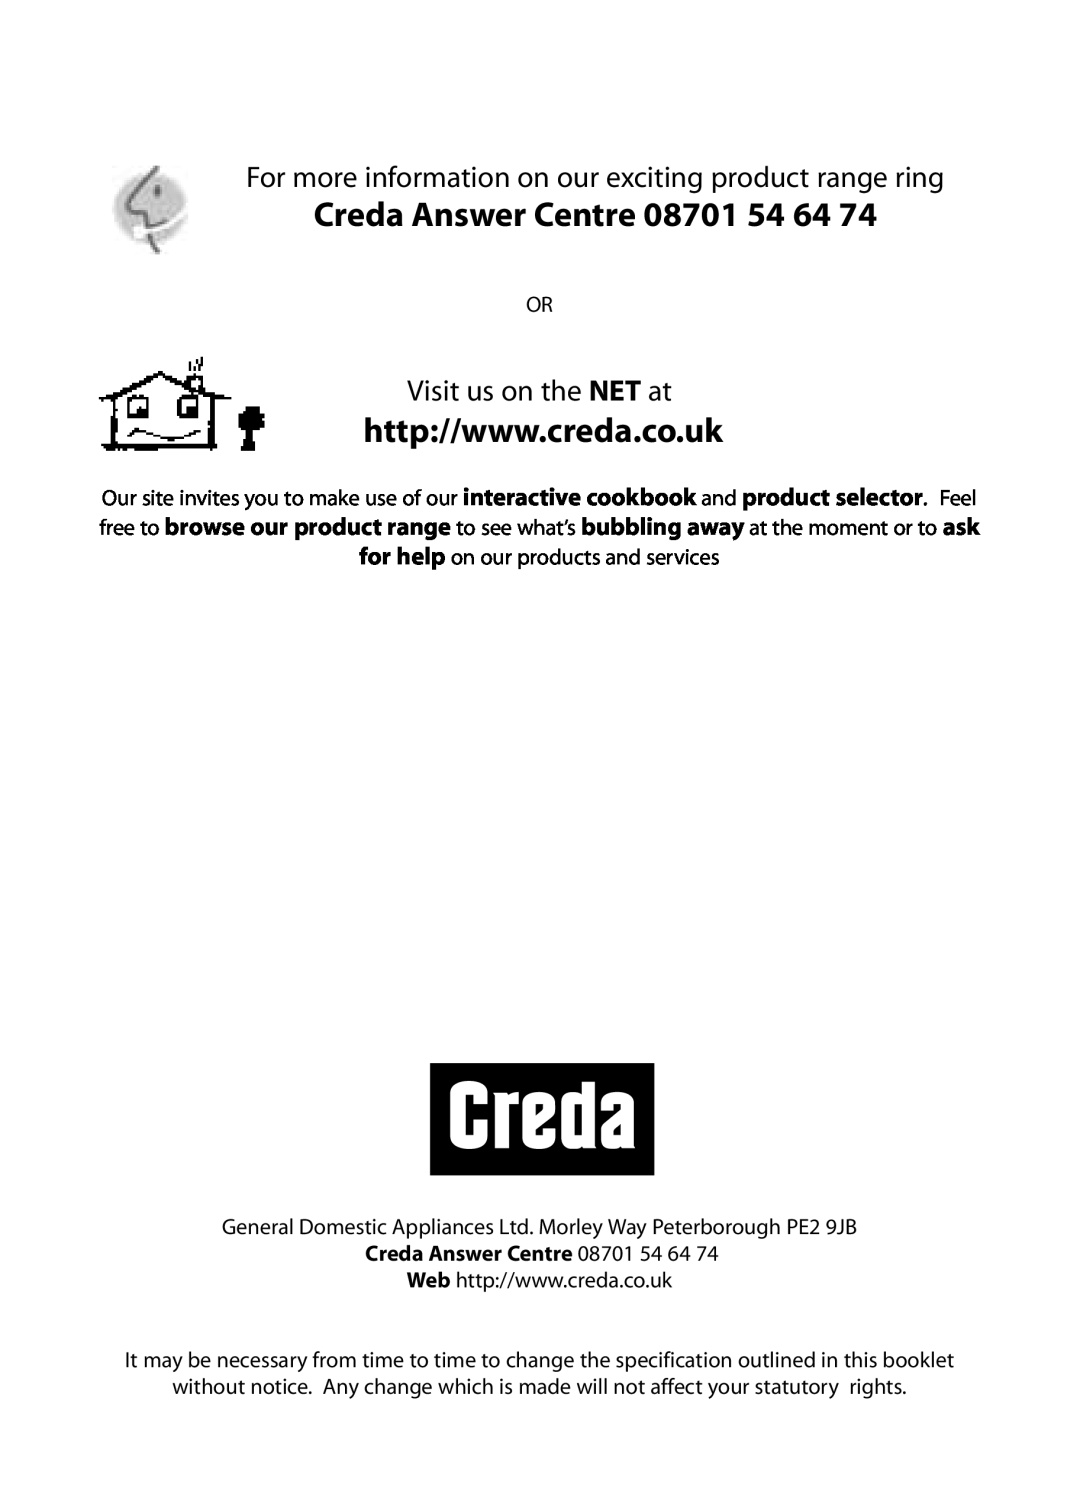 Creda S150E manual Creda Answer Centre 08701 54 64, For more information on our exciting product range ring 